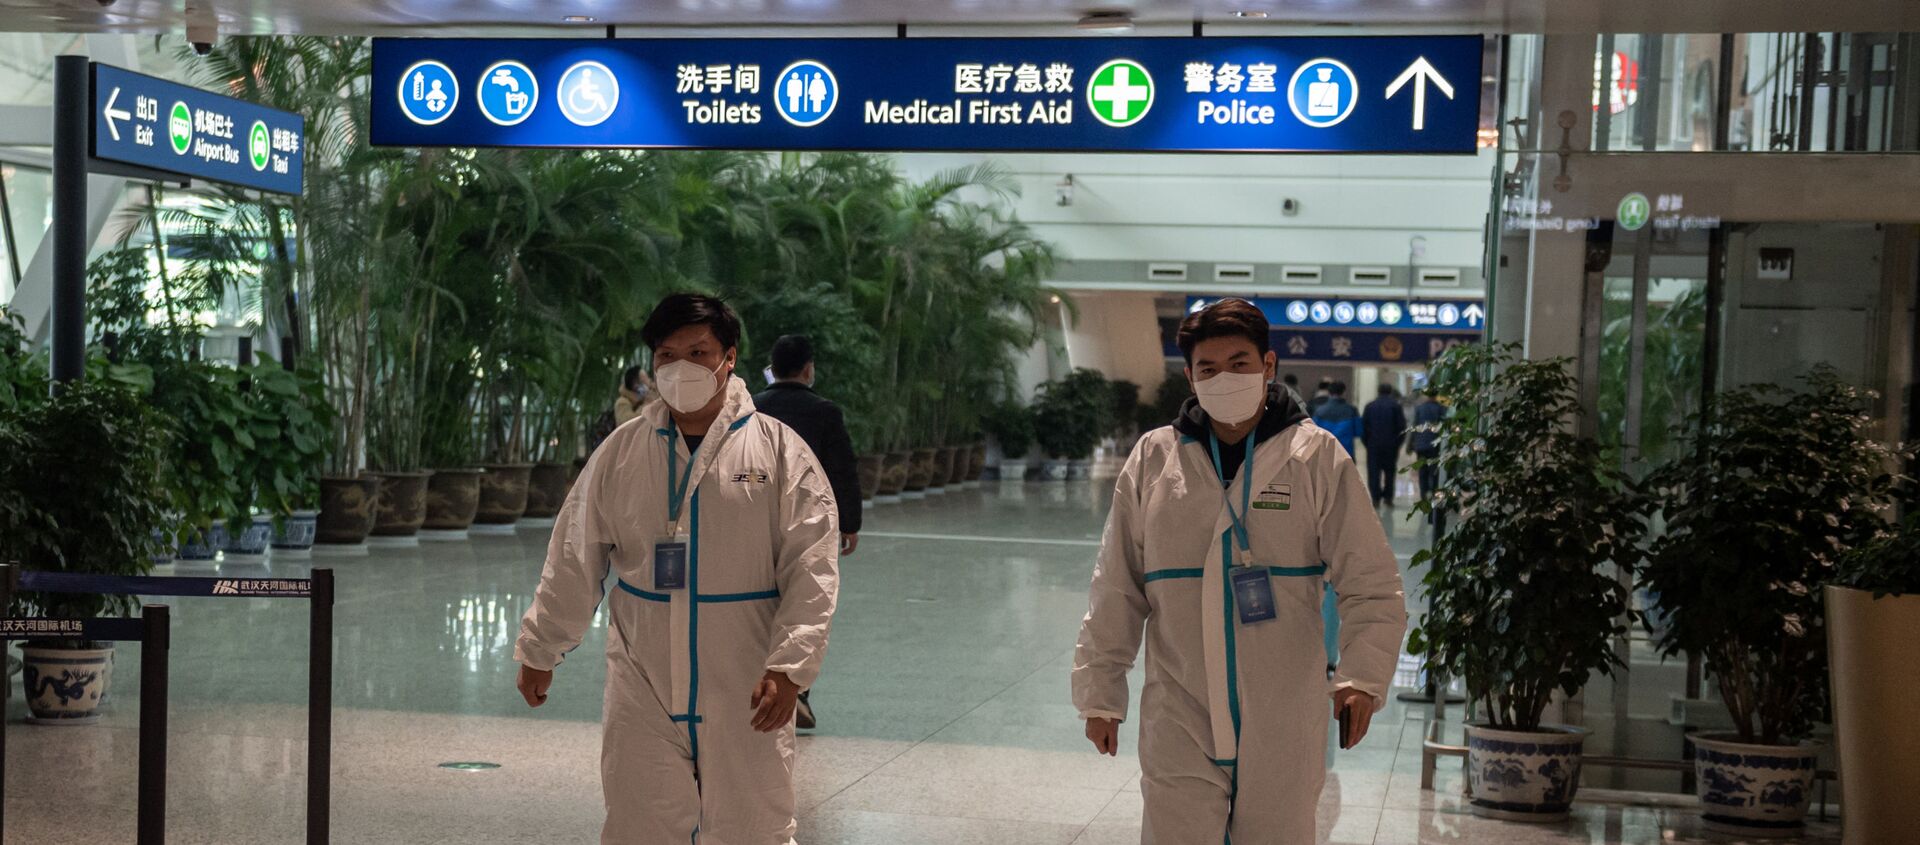 Health workers in suits walk in the international arrivals area, where arriving travelers are to be taken into quarantine, at the international airport in Wuhan on January 14, 2021, ahead of the expected arrival of a World Health Organization (WHO) team investigating the origins of the Covid-19 pandemic. (Photo by NICOLAS ASFOURI / AFP) - Sputnik International, 1920, 14.02.2021